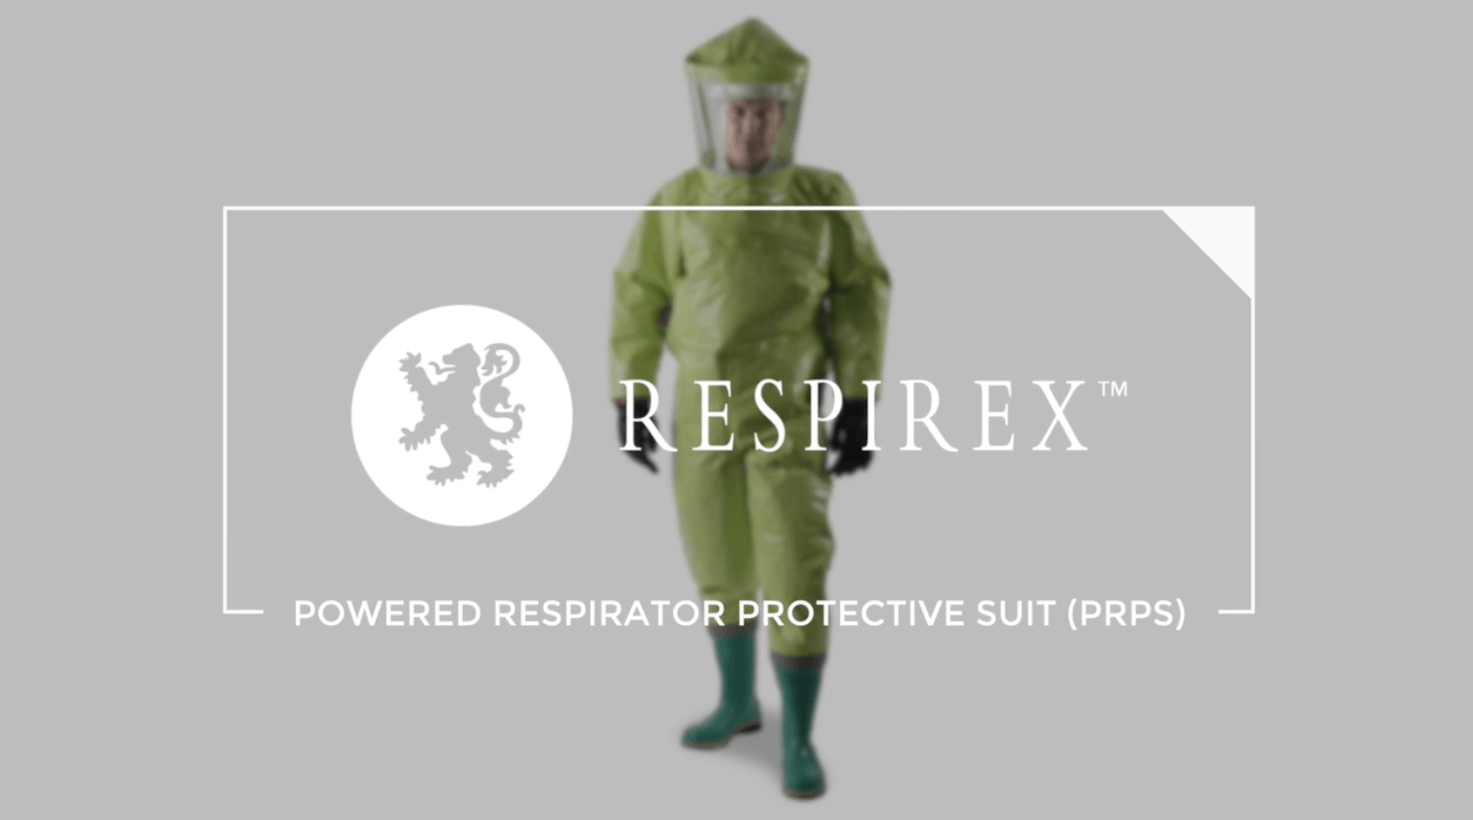 Powered Respirator Protective Suit (PRPS) from Respirex International